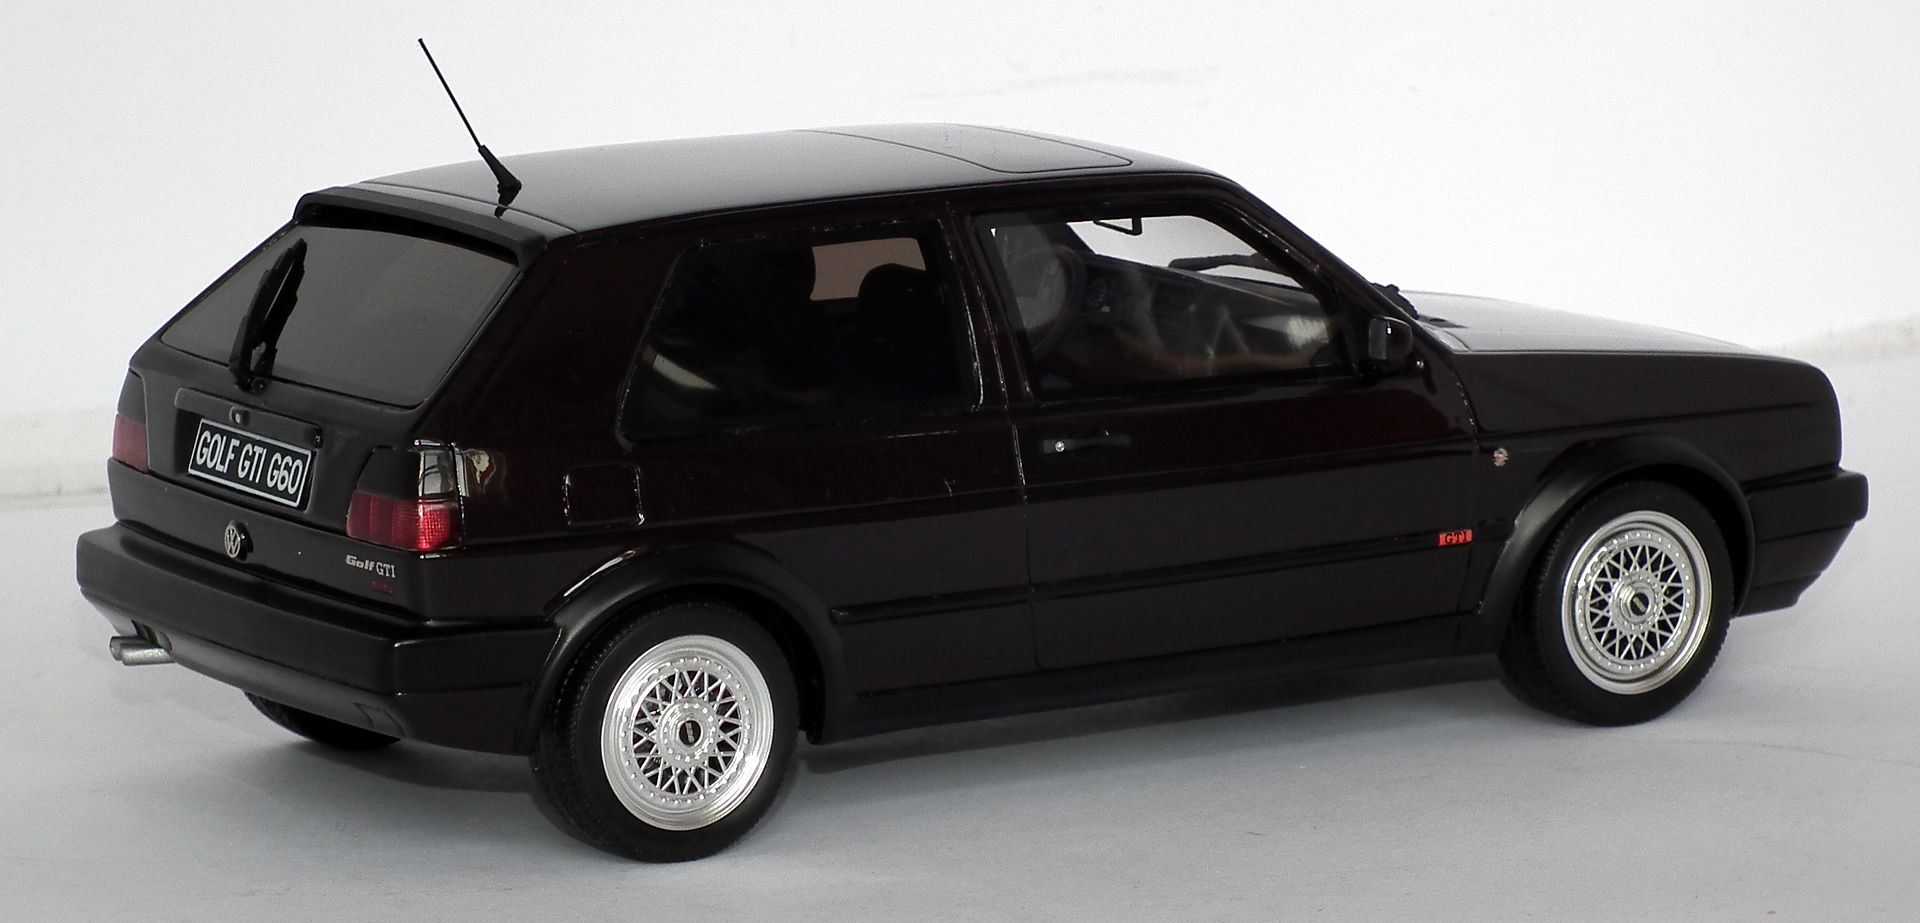 1980 see the birth of Turbo Renault 5. Been driven by an engine derived from